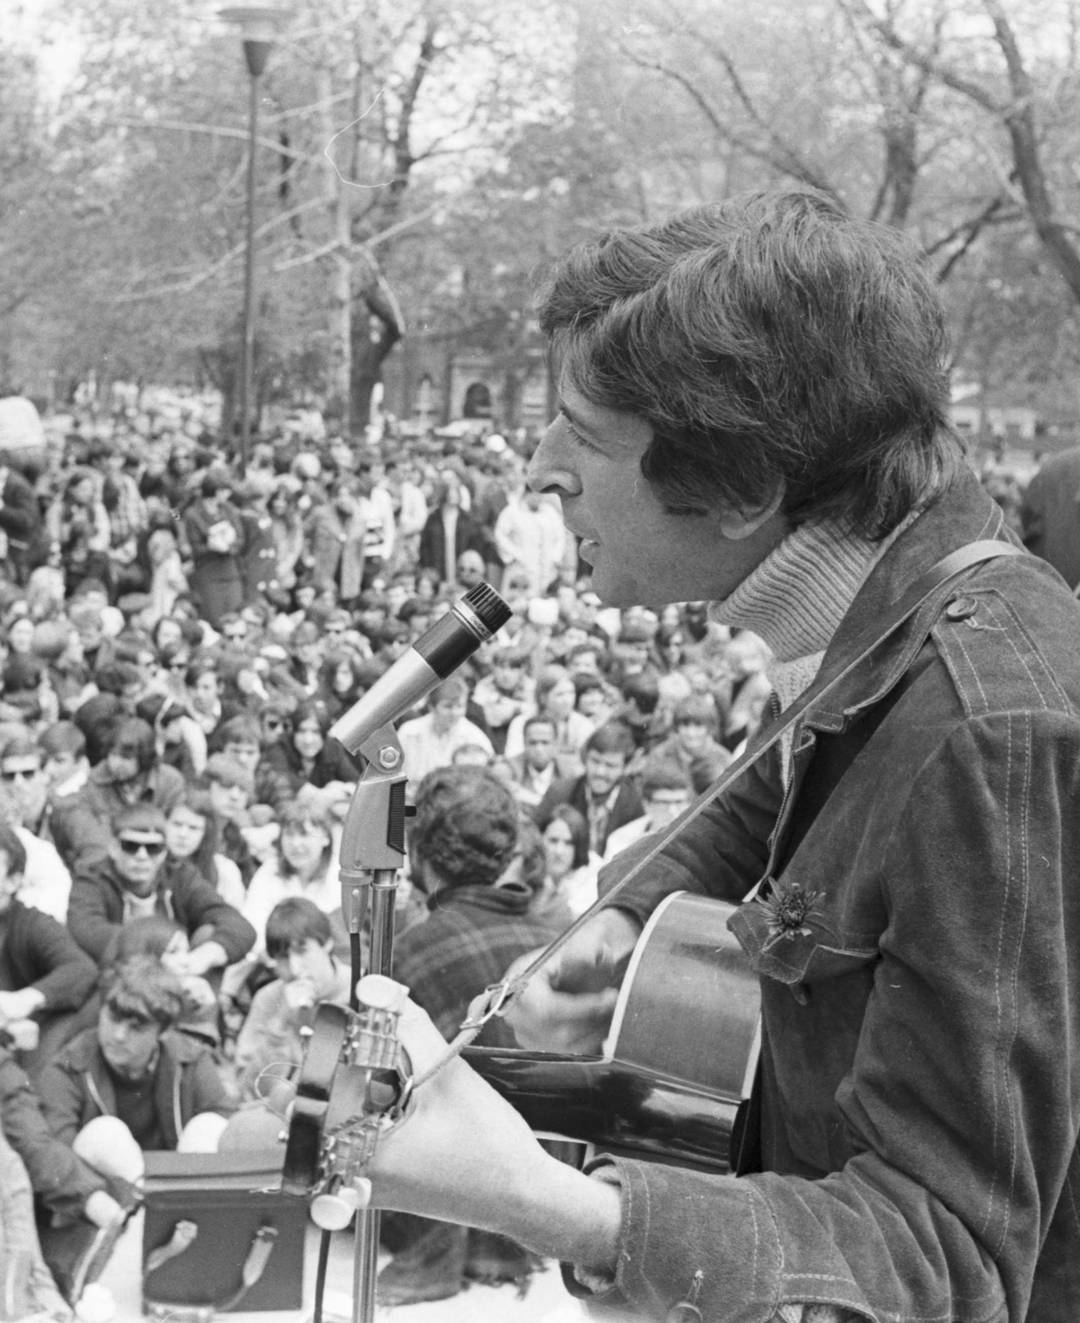 Leonard Cohen performing at the love-in at Queen's Park, Toronto, 1967